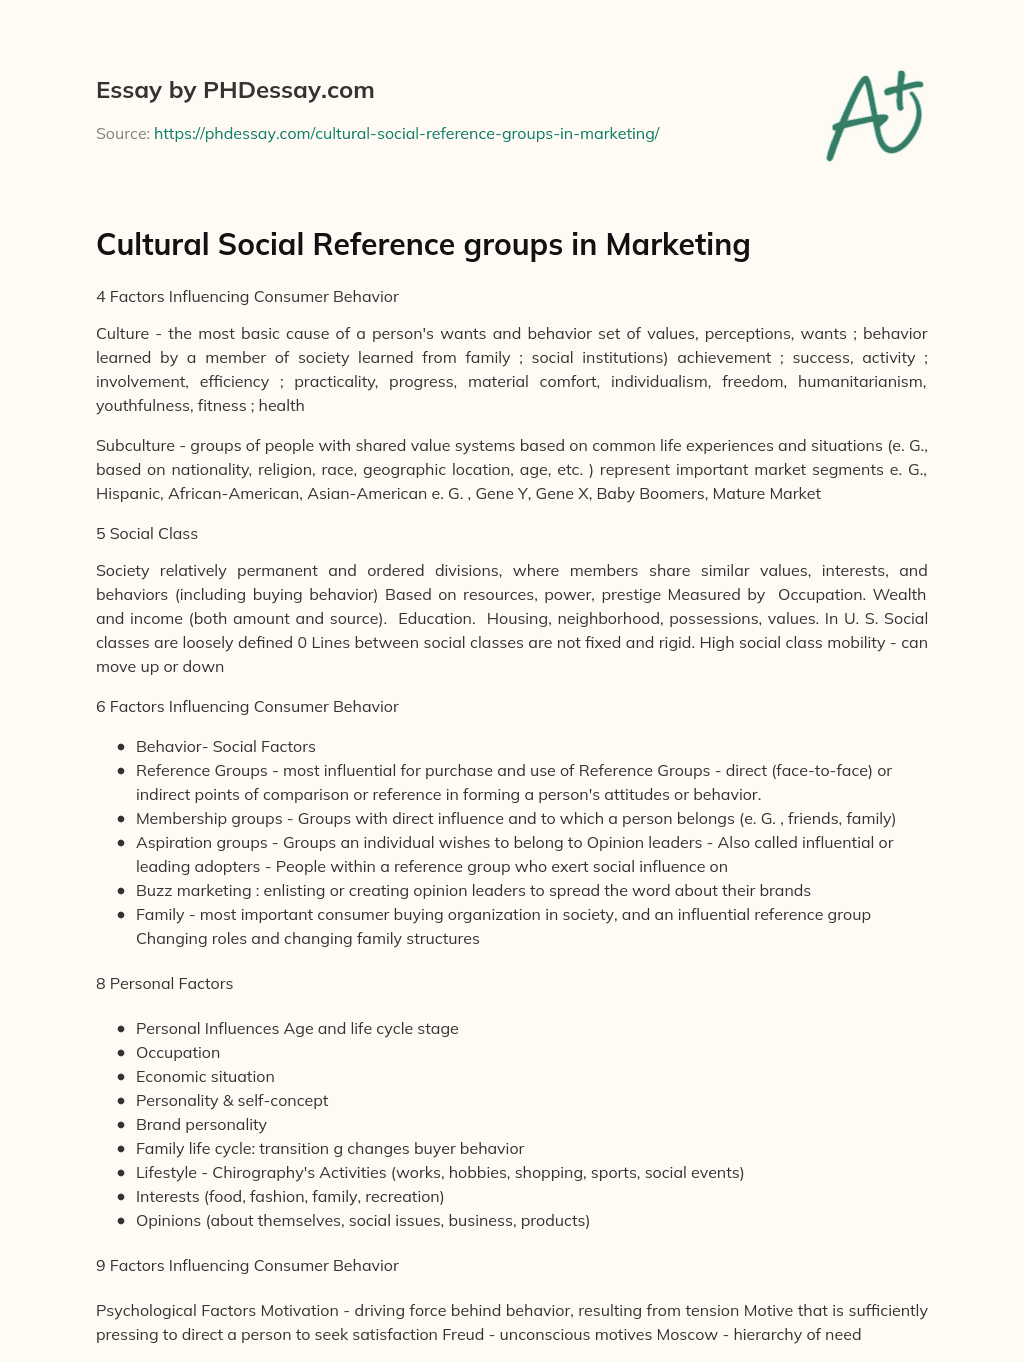 Cultural Social Reference groups in Marketing essay